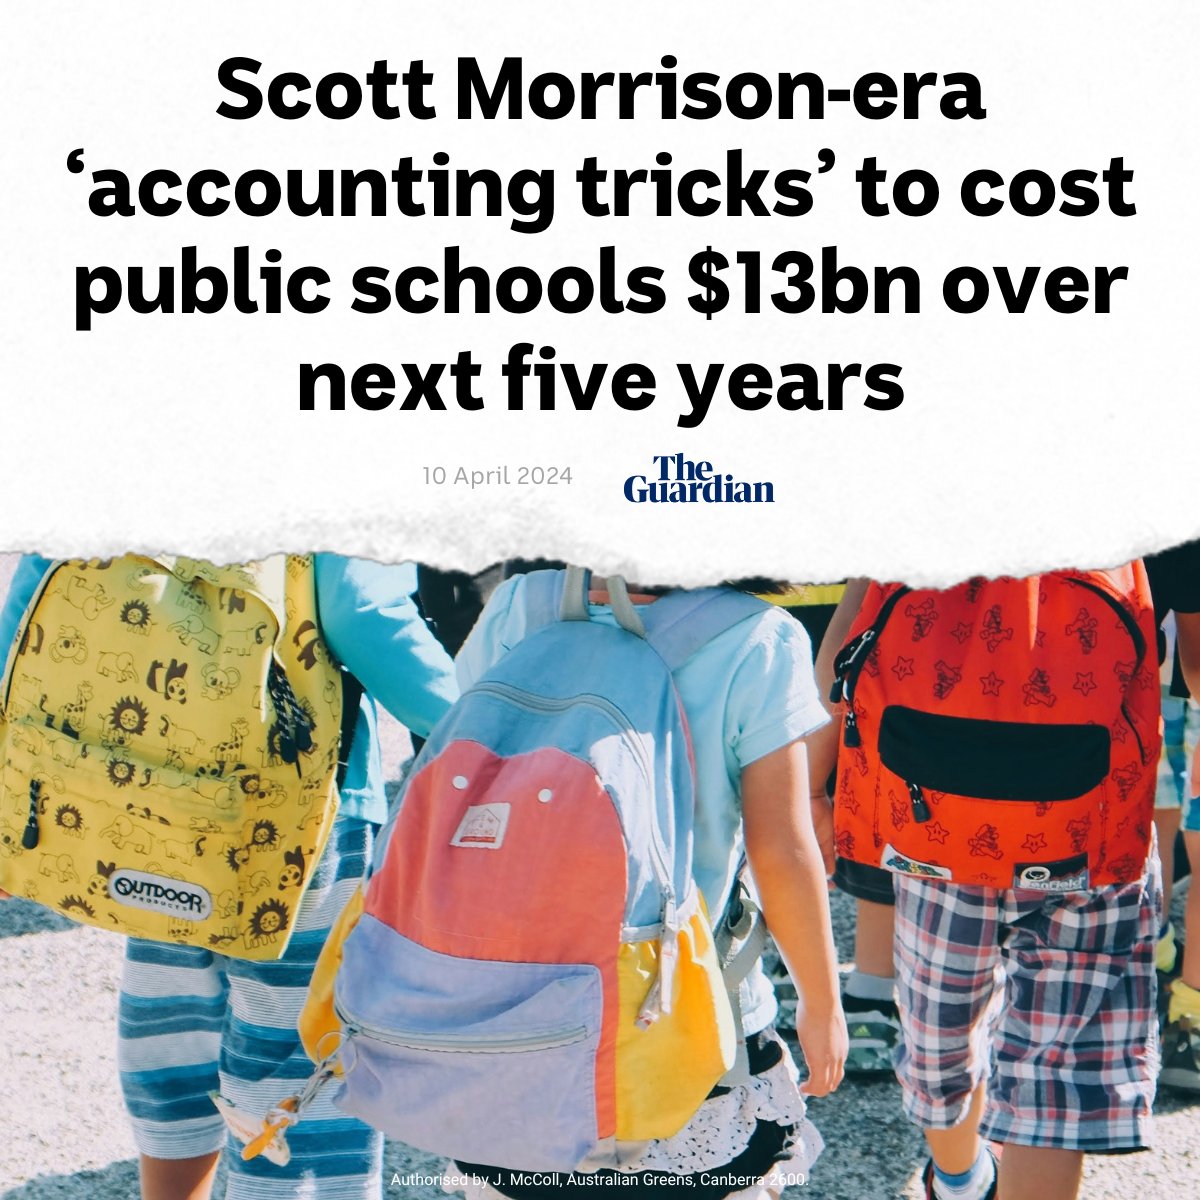 If Labor retains the dodgy loopholes that allow states and territories to short-change schools - which they've signalled they will - they'll be robbing every public school kid in the country. New funding deals must deliver 100% funding to every public school by January 2025.